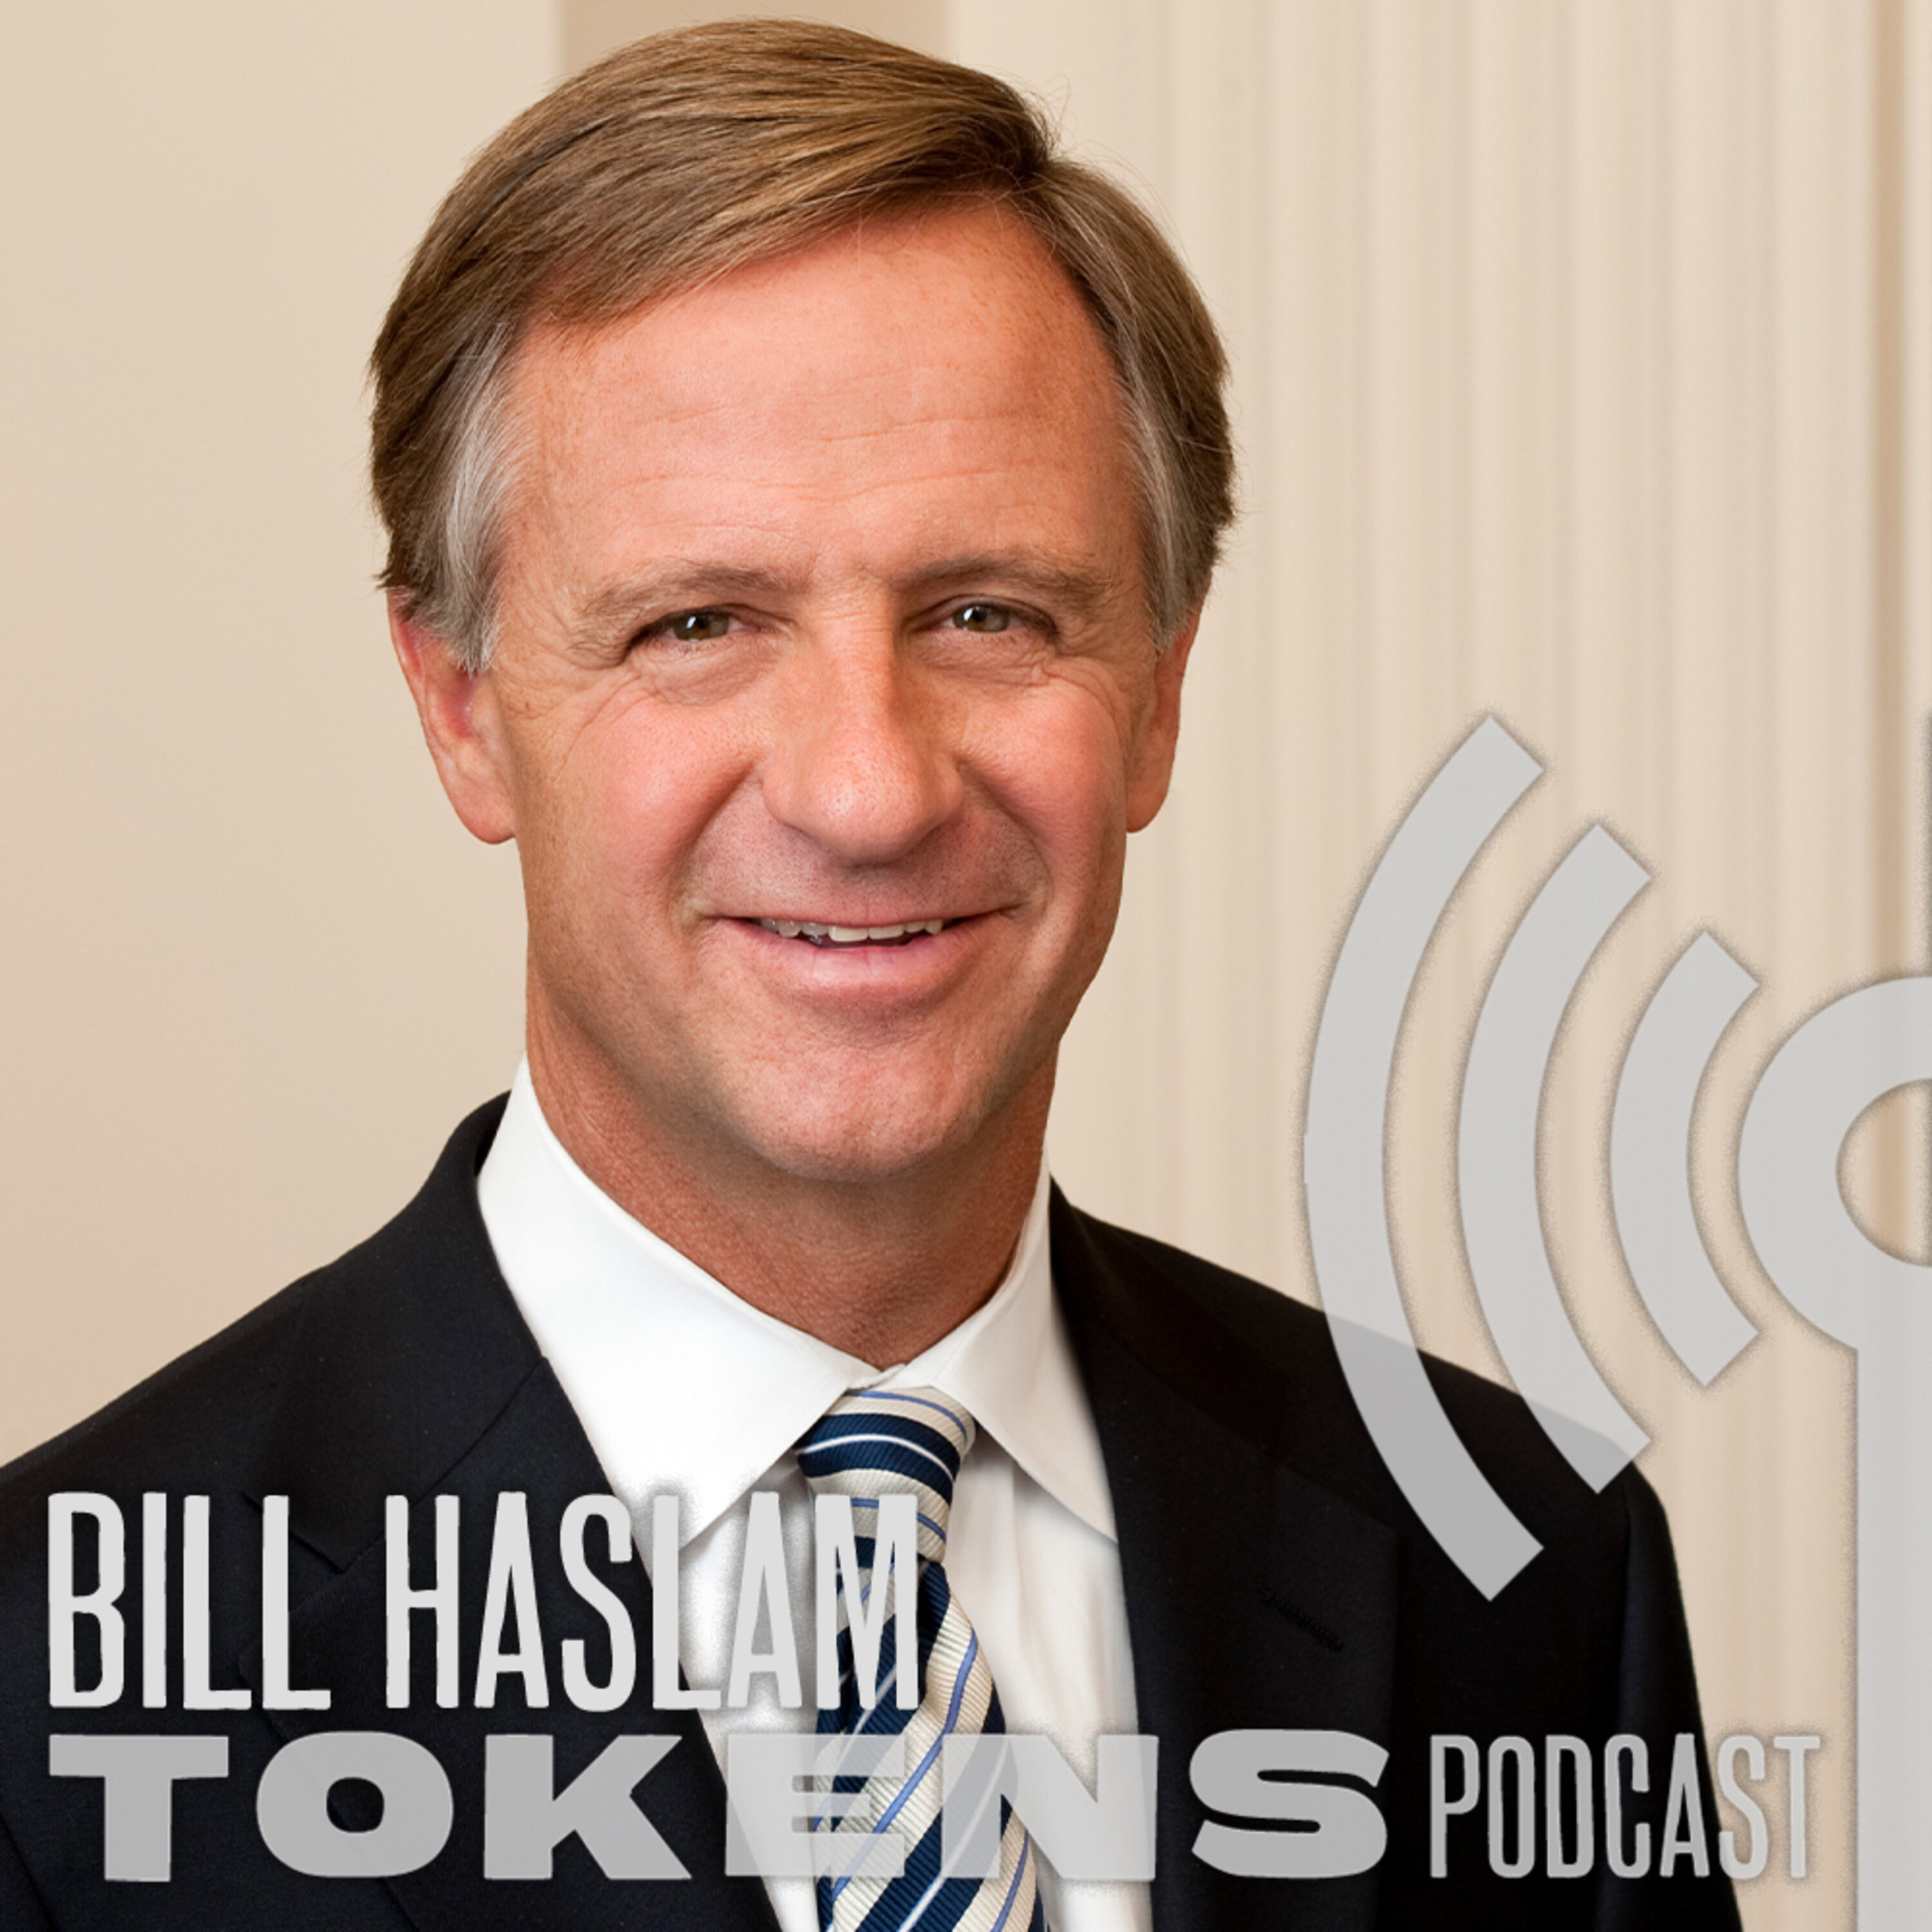 Thumbnail for "2: Humility and the Art of Politics: Bill Haslam".